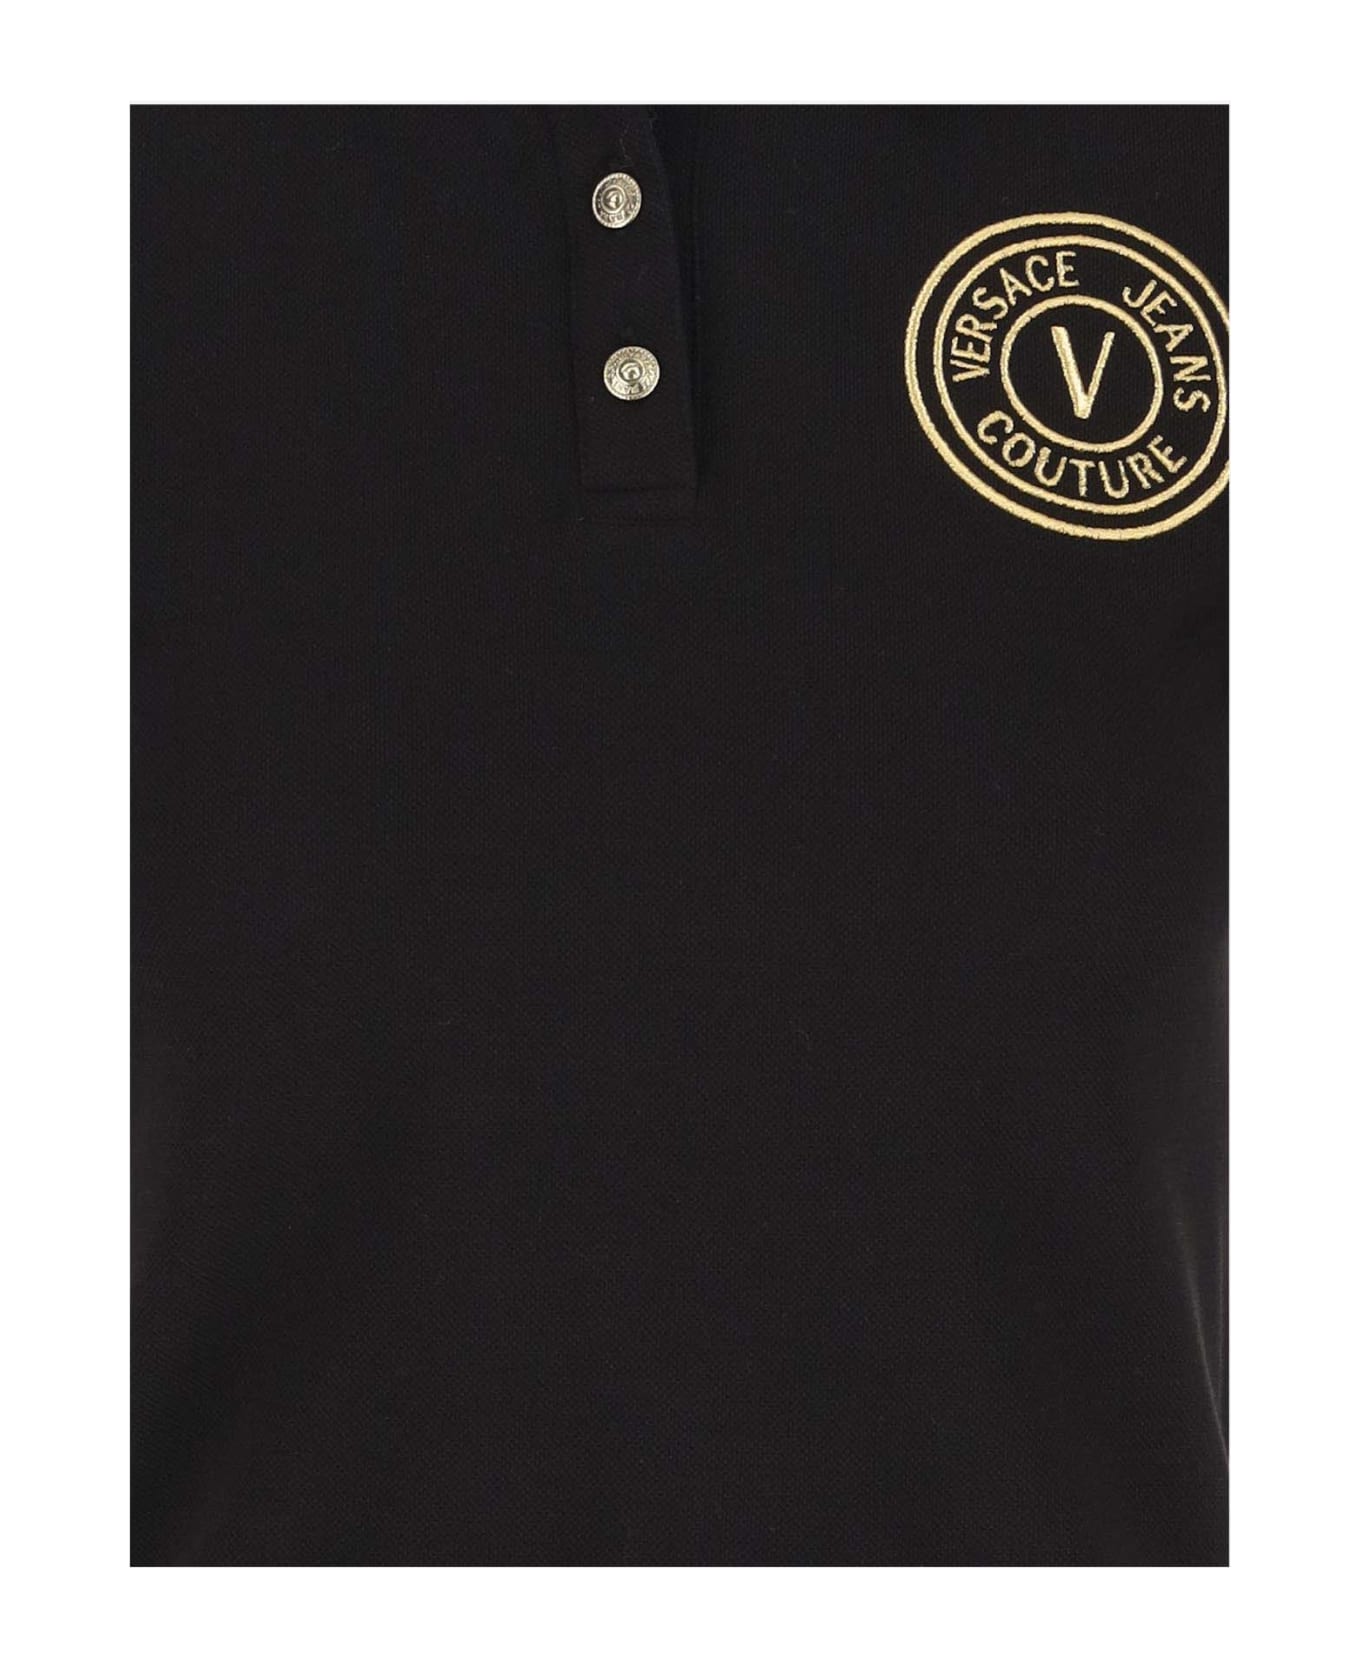 Versace Jeans Couture Polo - Black